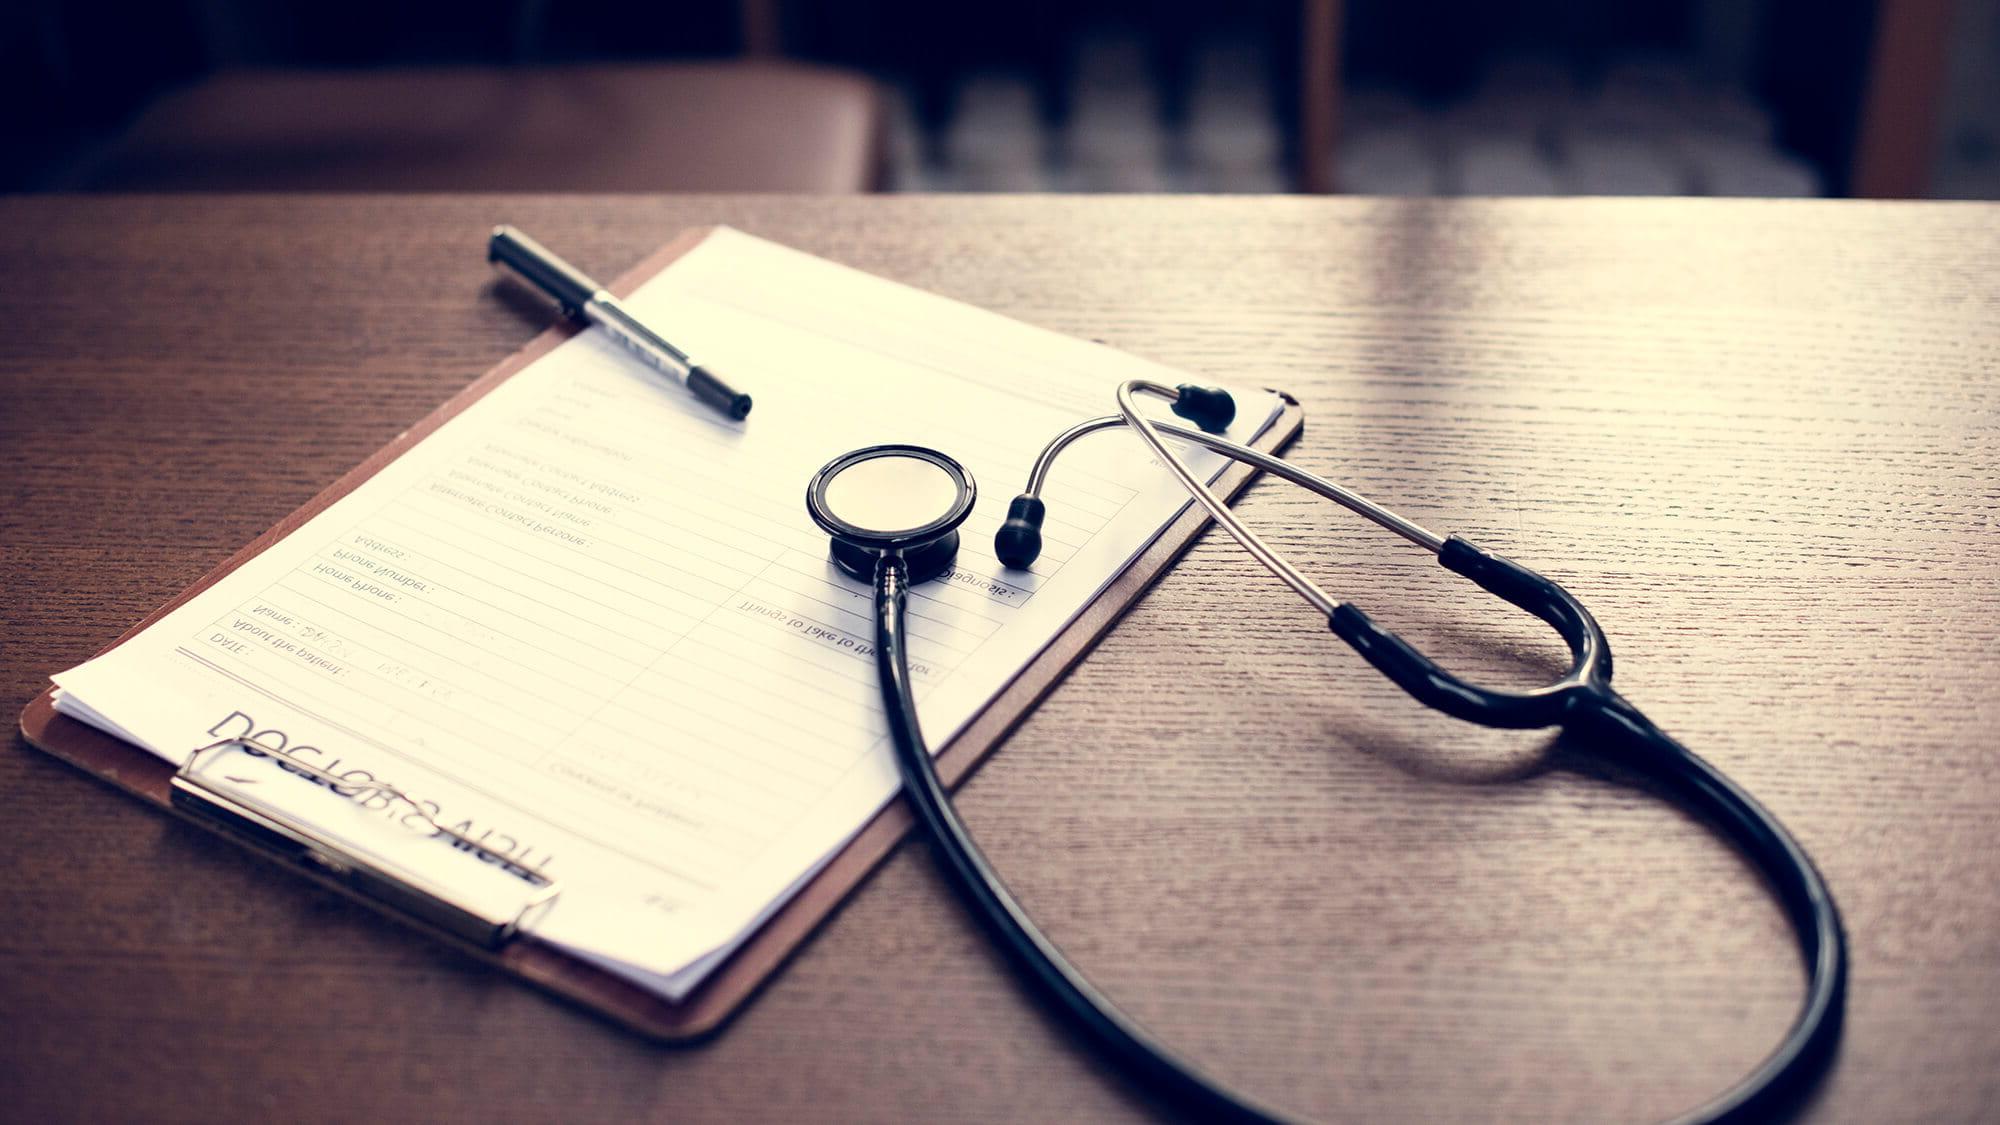 checkup form and stethoscope laying on desk